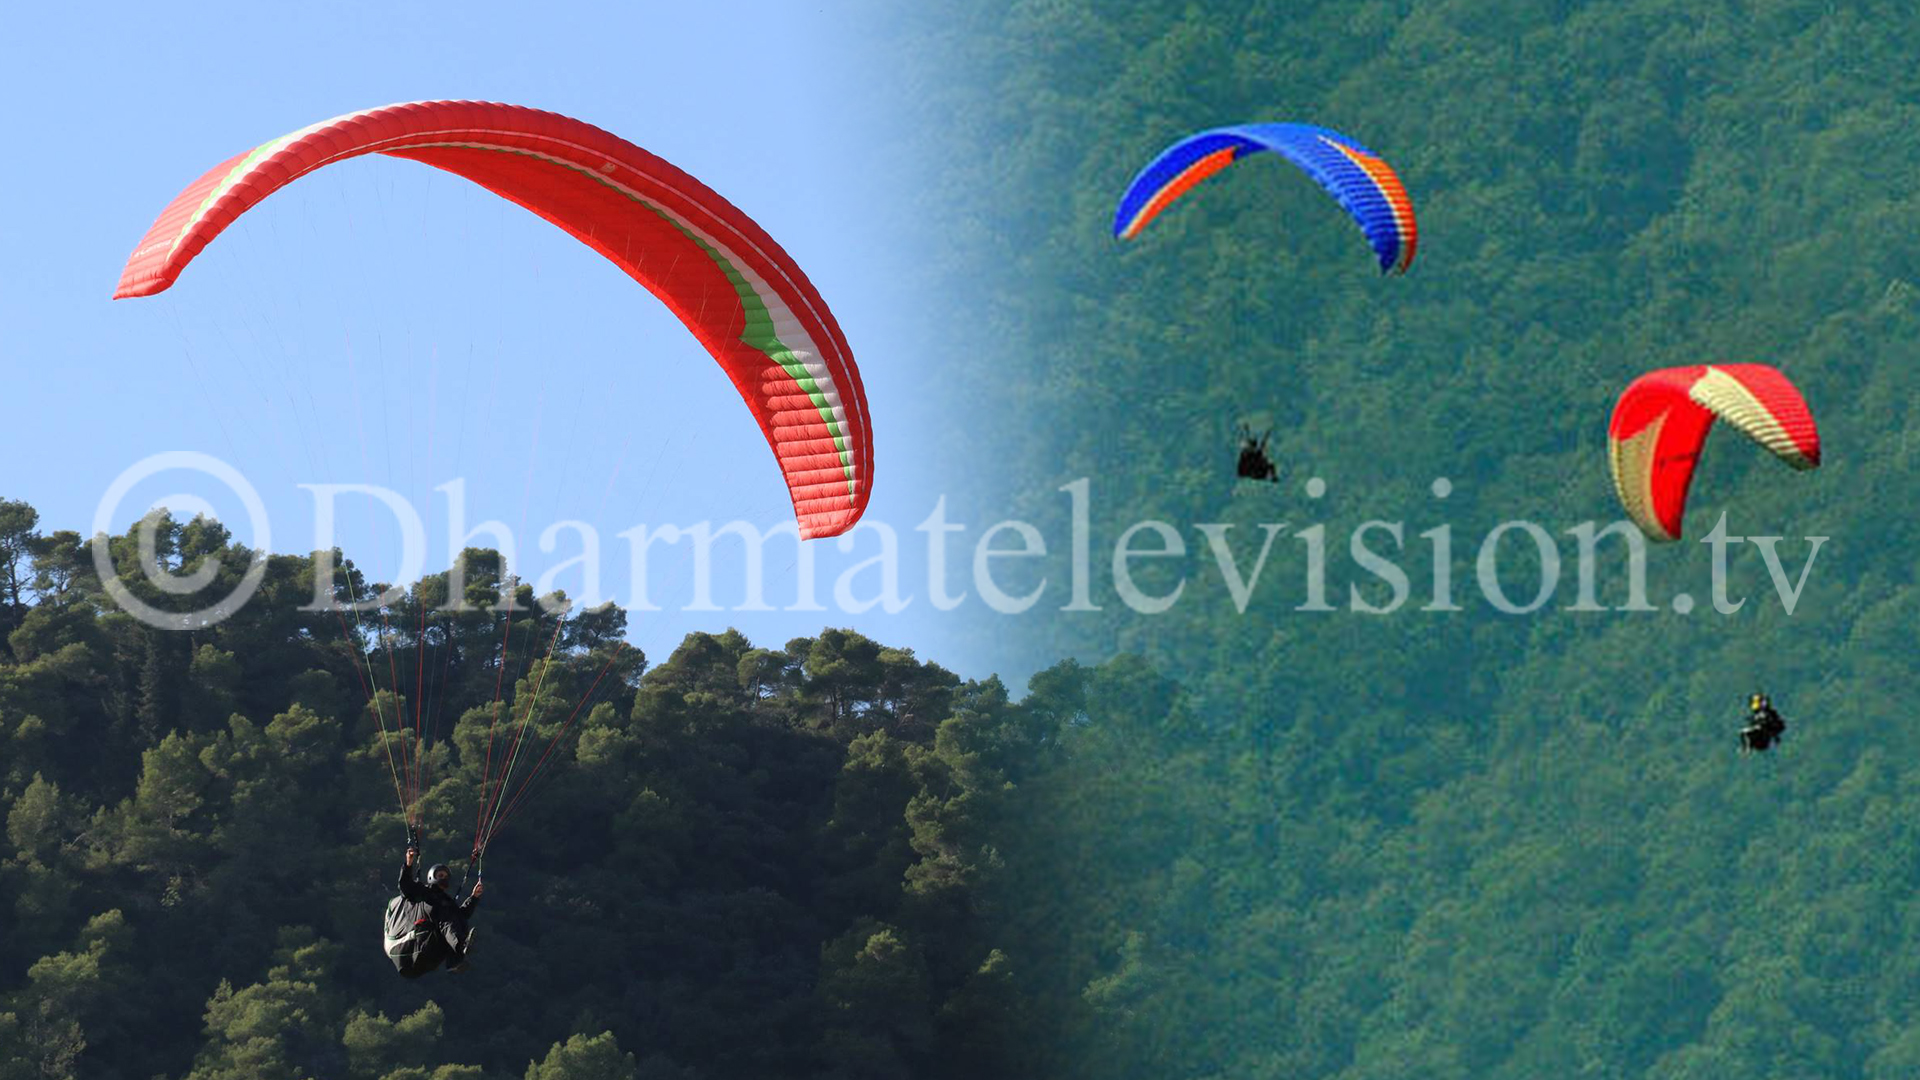 Paragliding coming into operation from 1st October